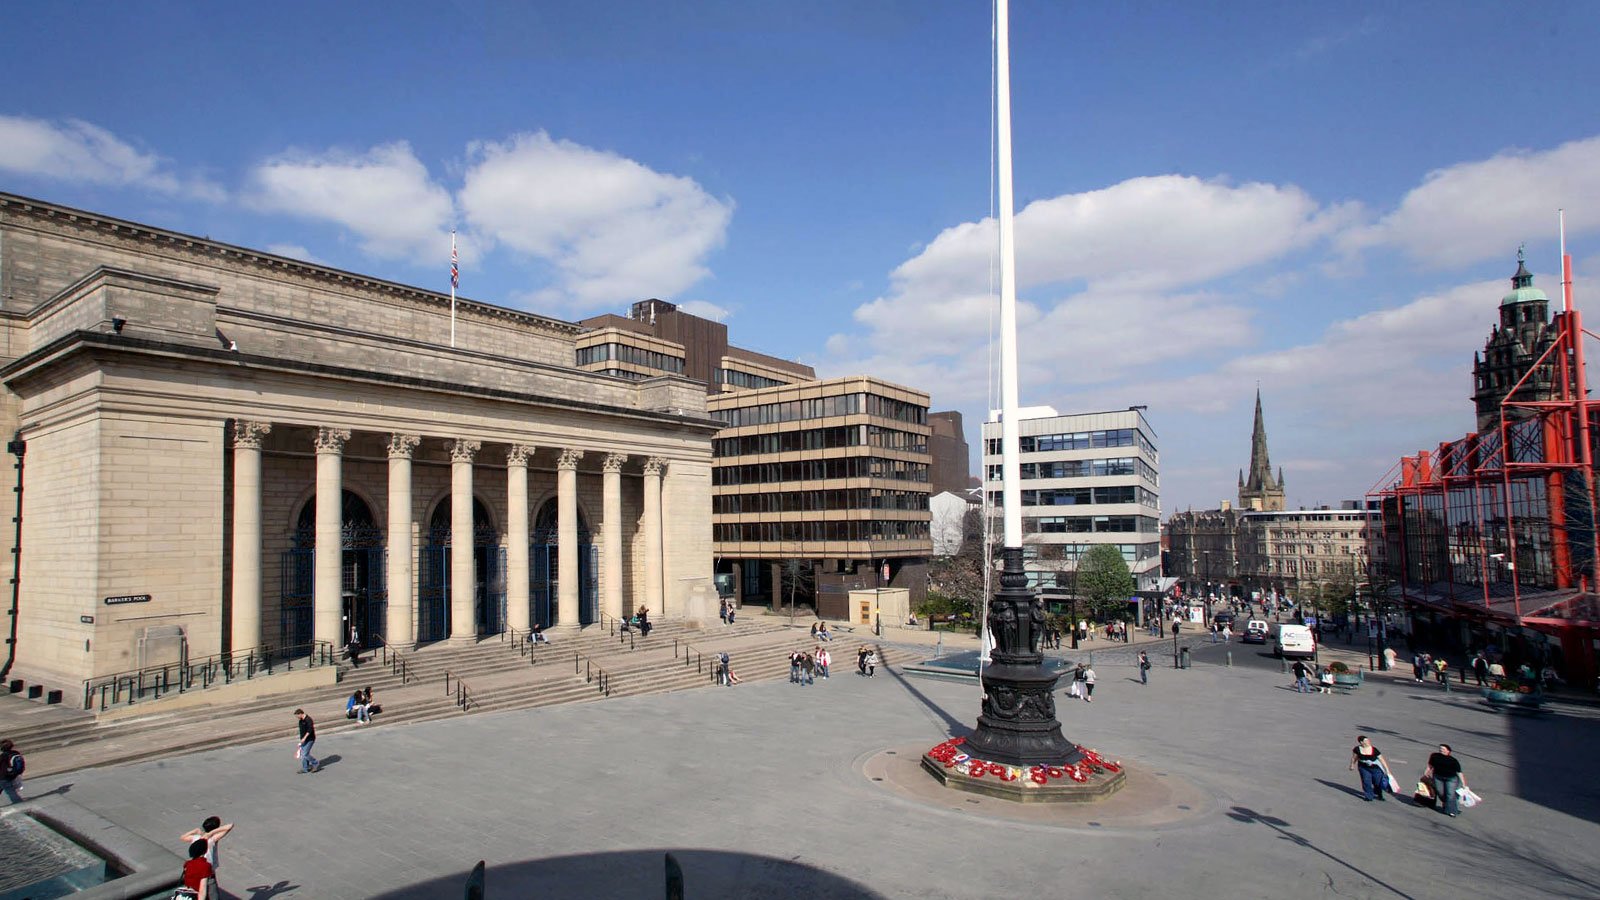 Barkers Pool, Sheffield City Hall and the Cenotaph